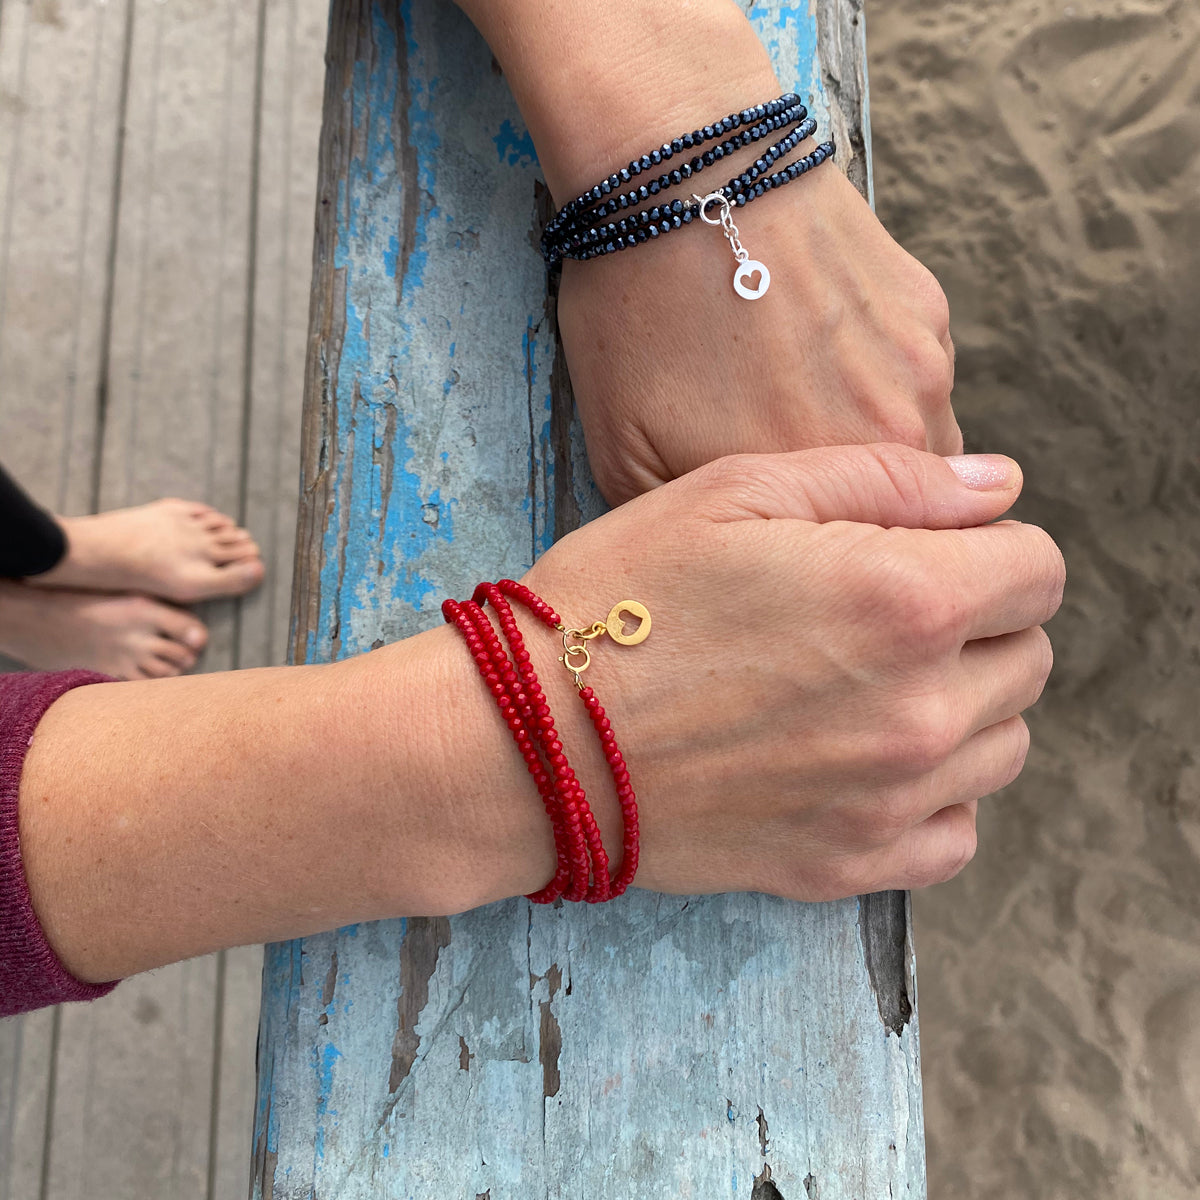 Wear this bracelet as a reminder that Love starts with Self Love. If you don't love yourself, you can not love others, said the Dalai Lama. 